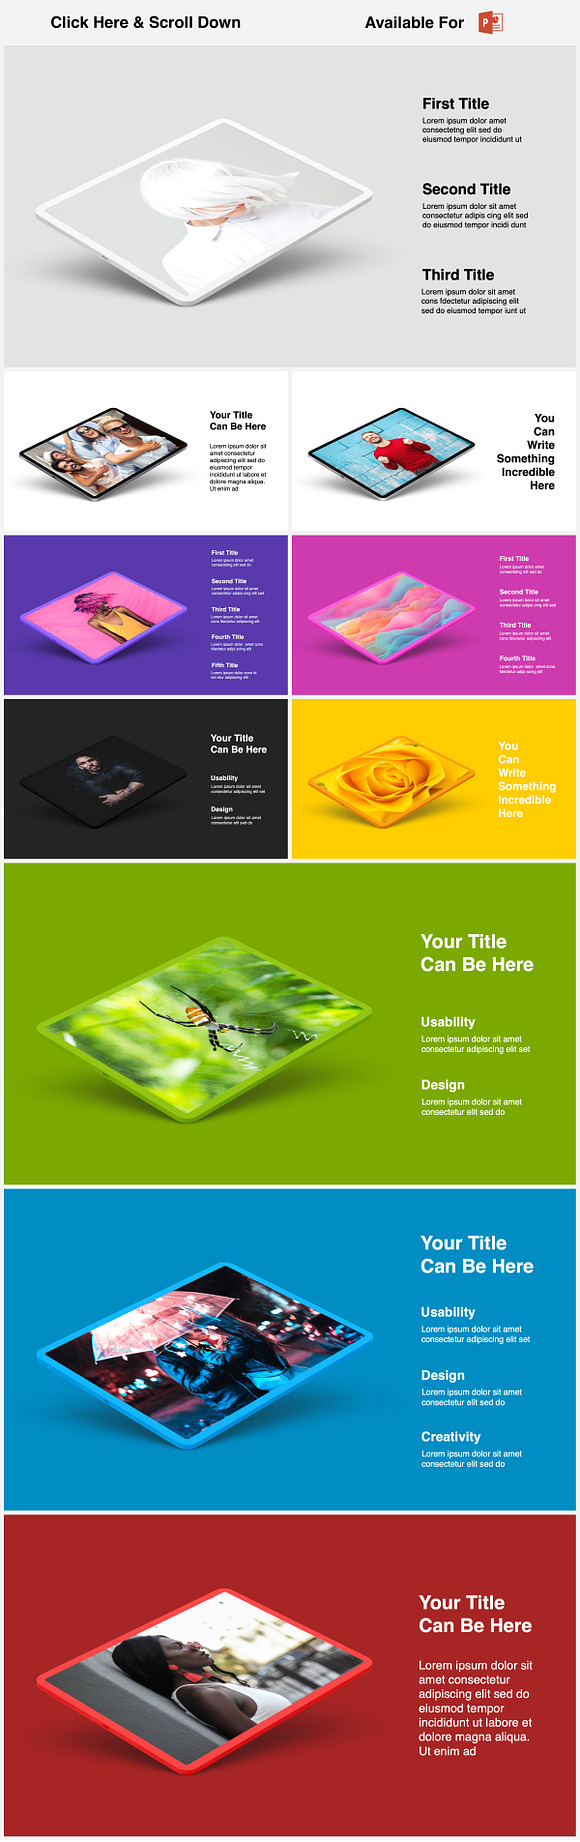 Animated Mockups Presentation Bundle in Keynote Templates - product preview 32